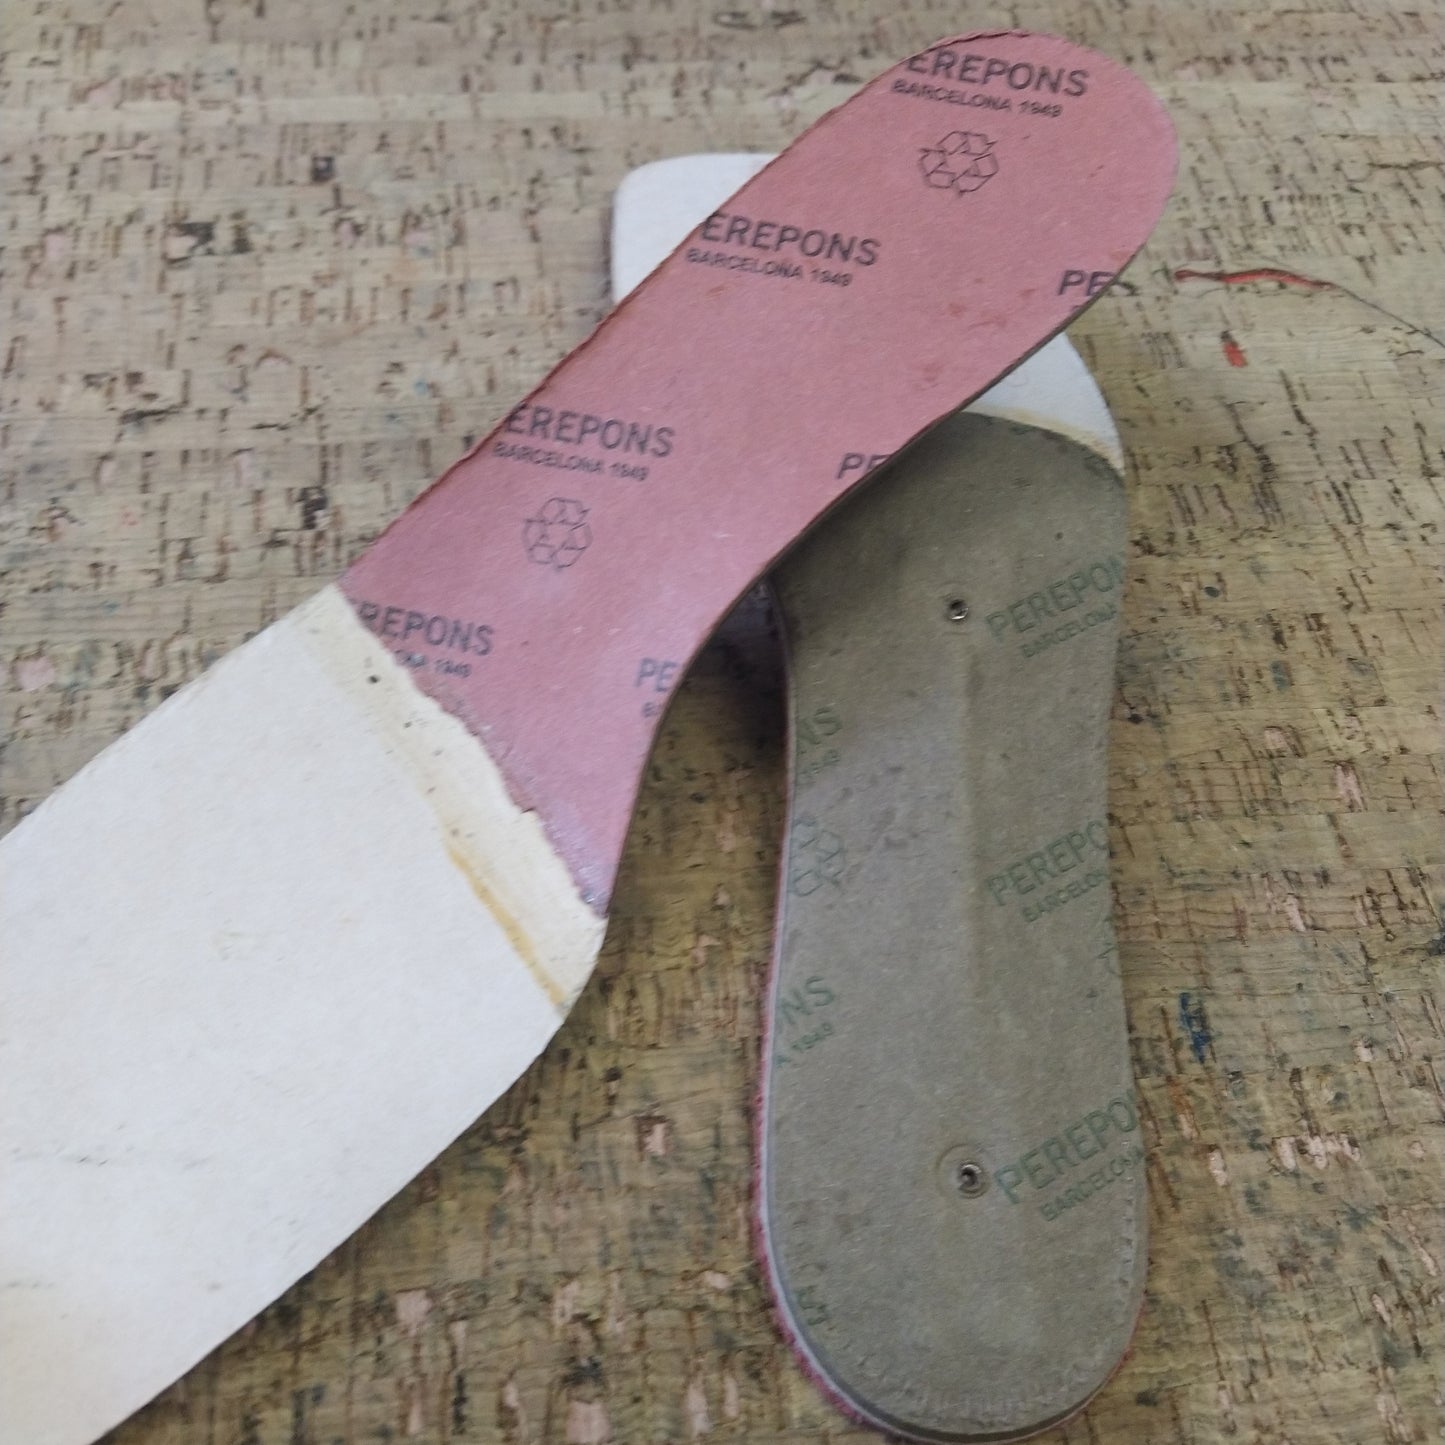 Cardboard insoles mot. ~7cm high for shoes (pair)